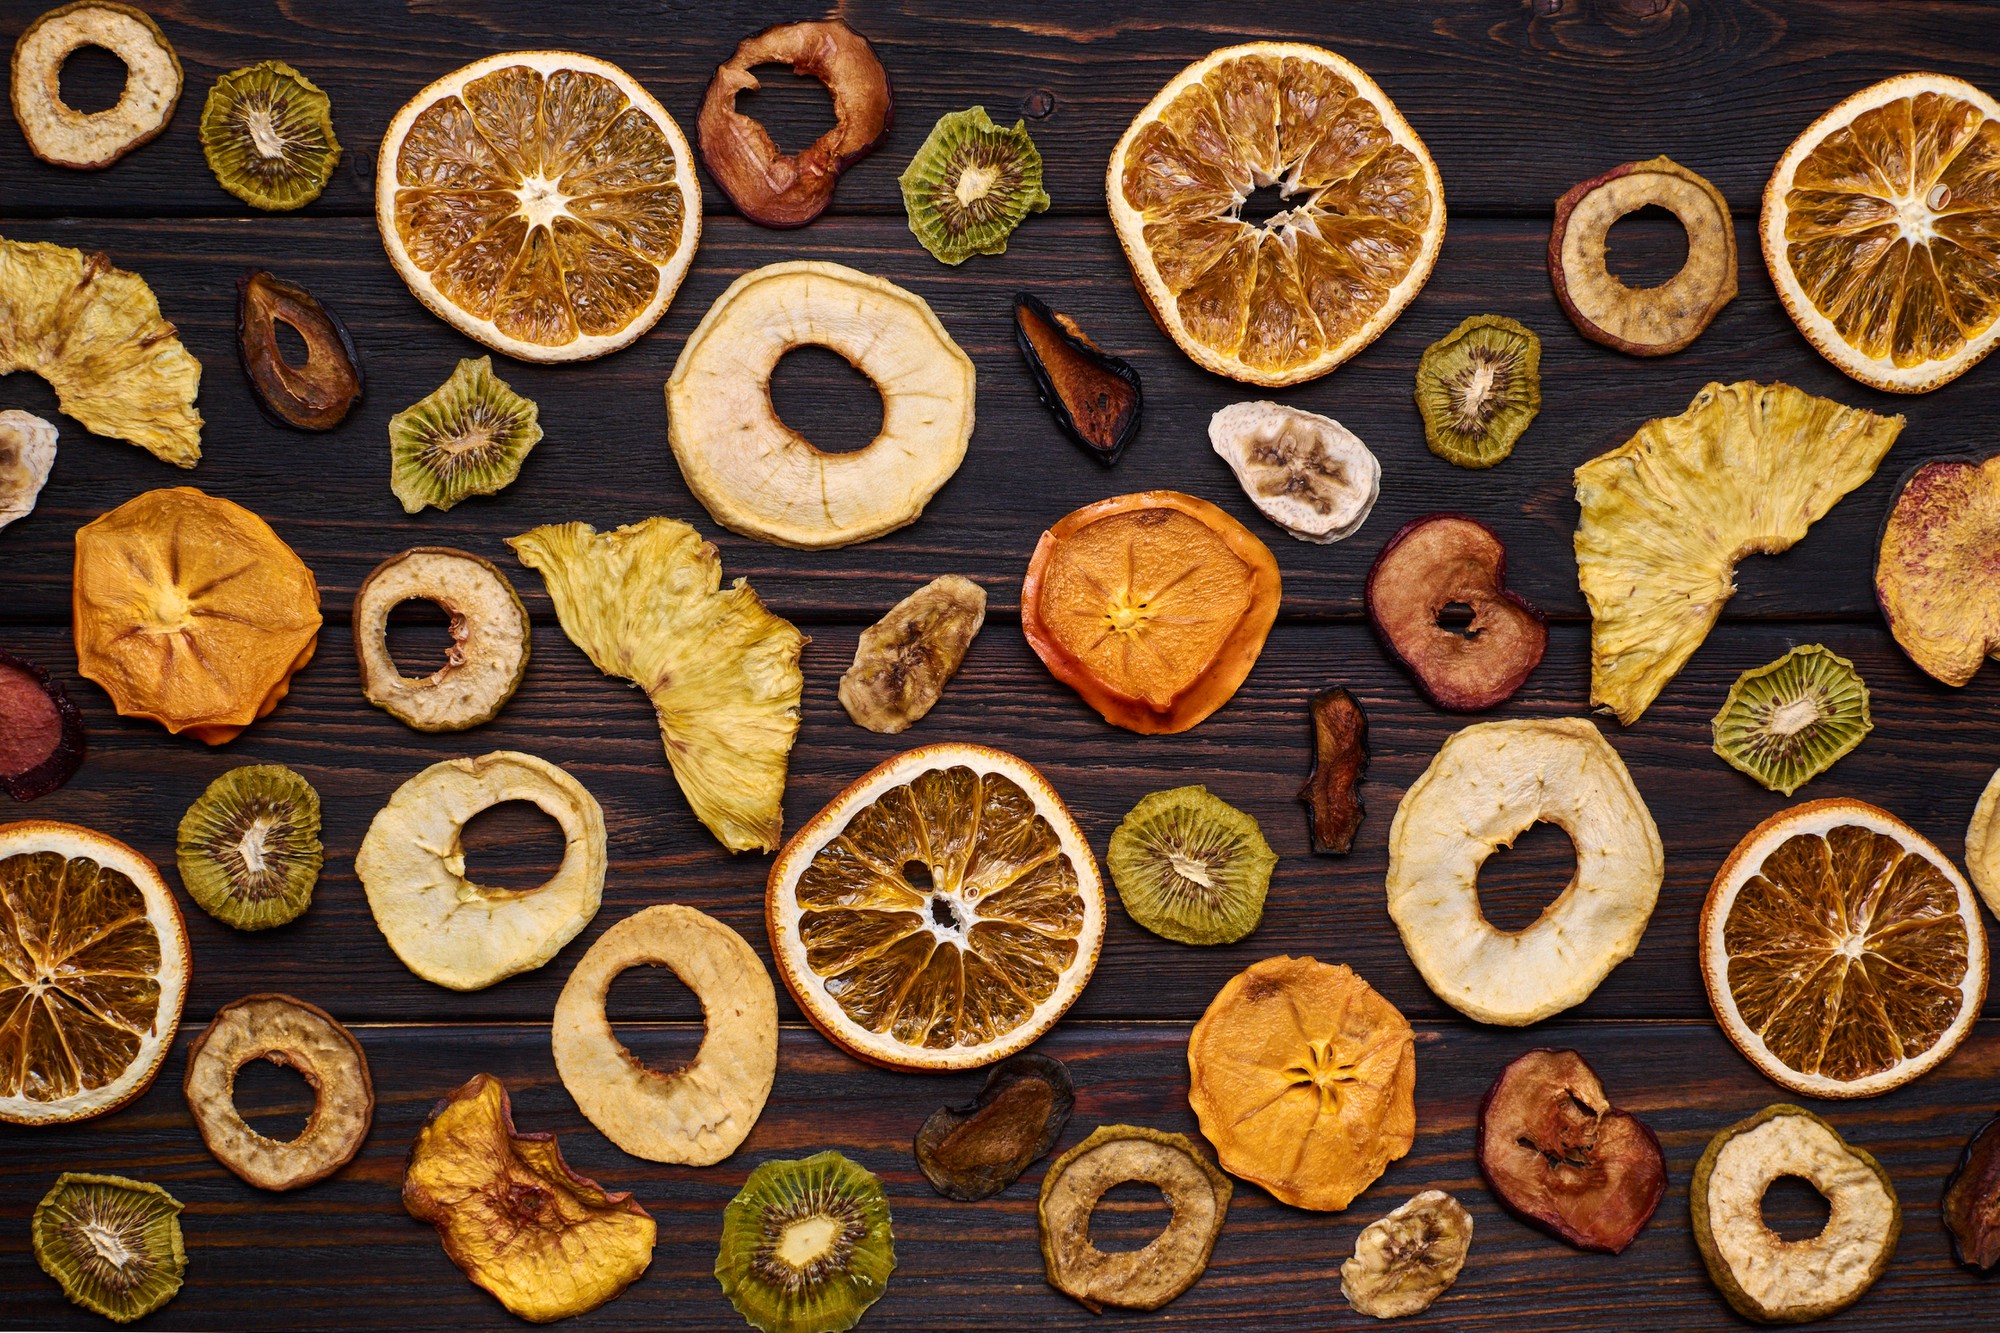 mix-dried-fruits-wooden-table_211889-688